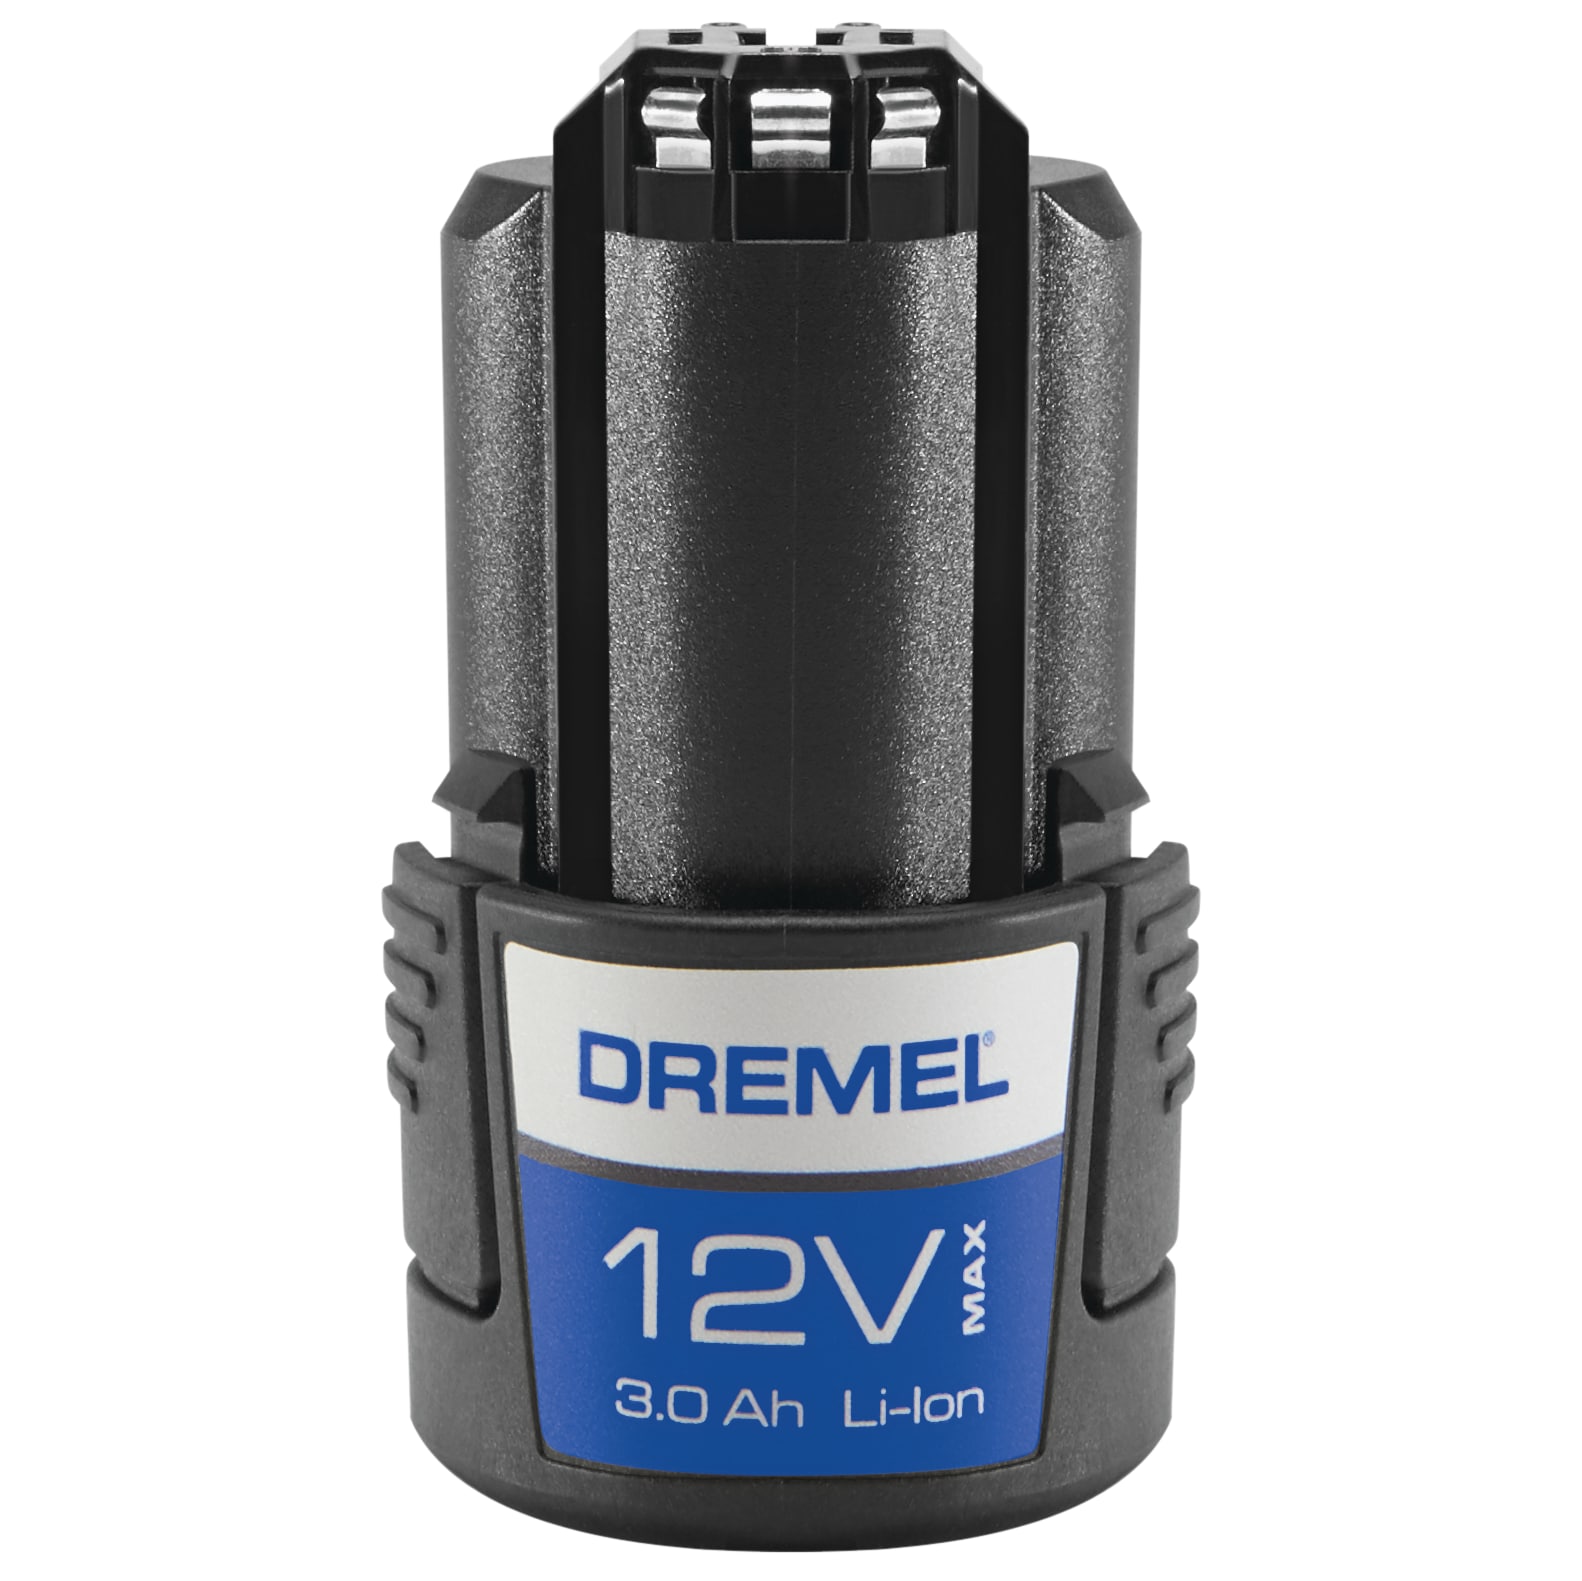 Showing The New Brushless, Cordless, Most powerful Dremel 8260